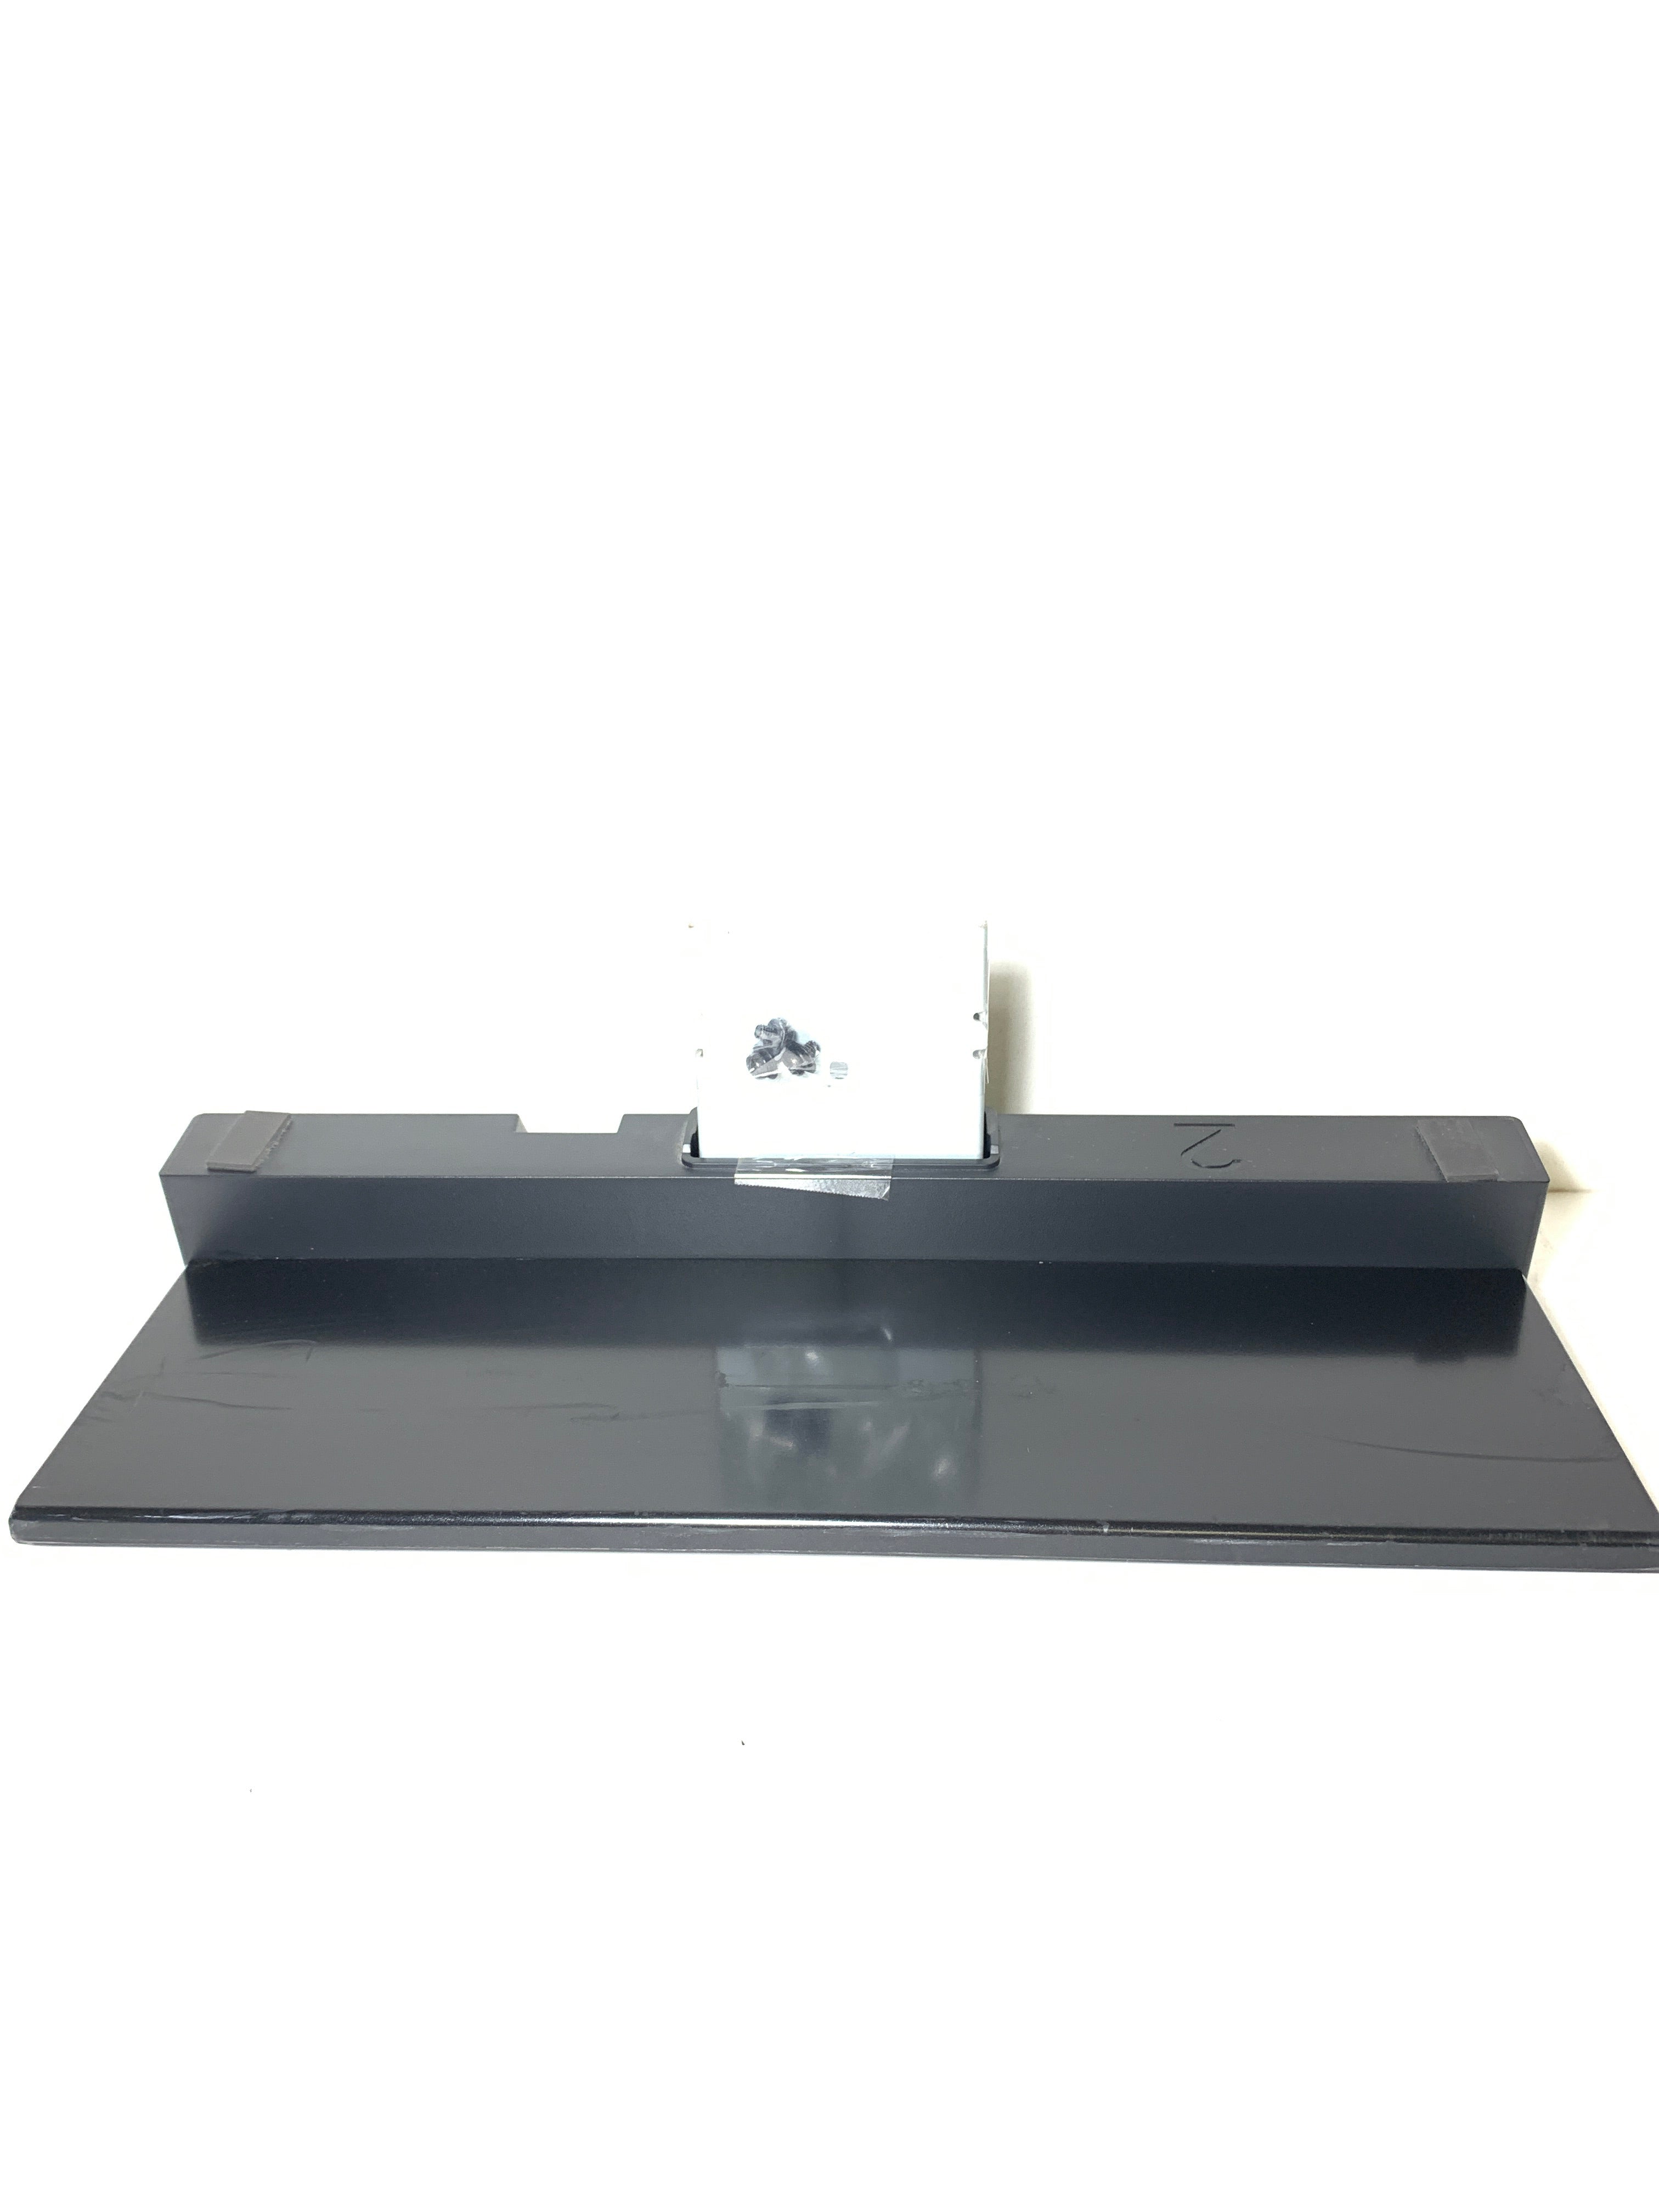 Sony KDL-26S3000 TV Stand/Base